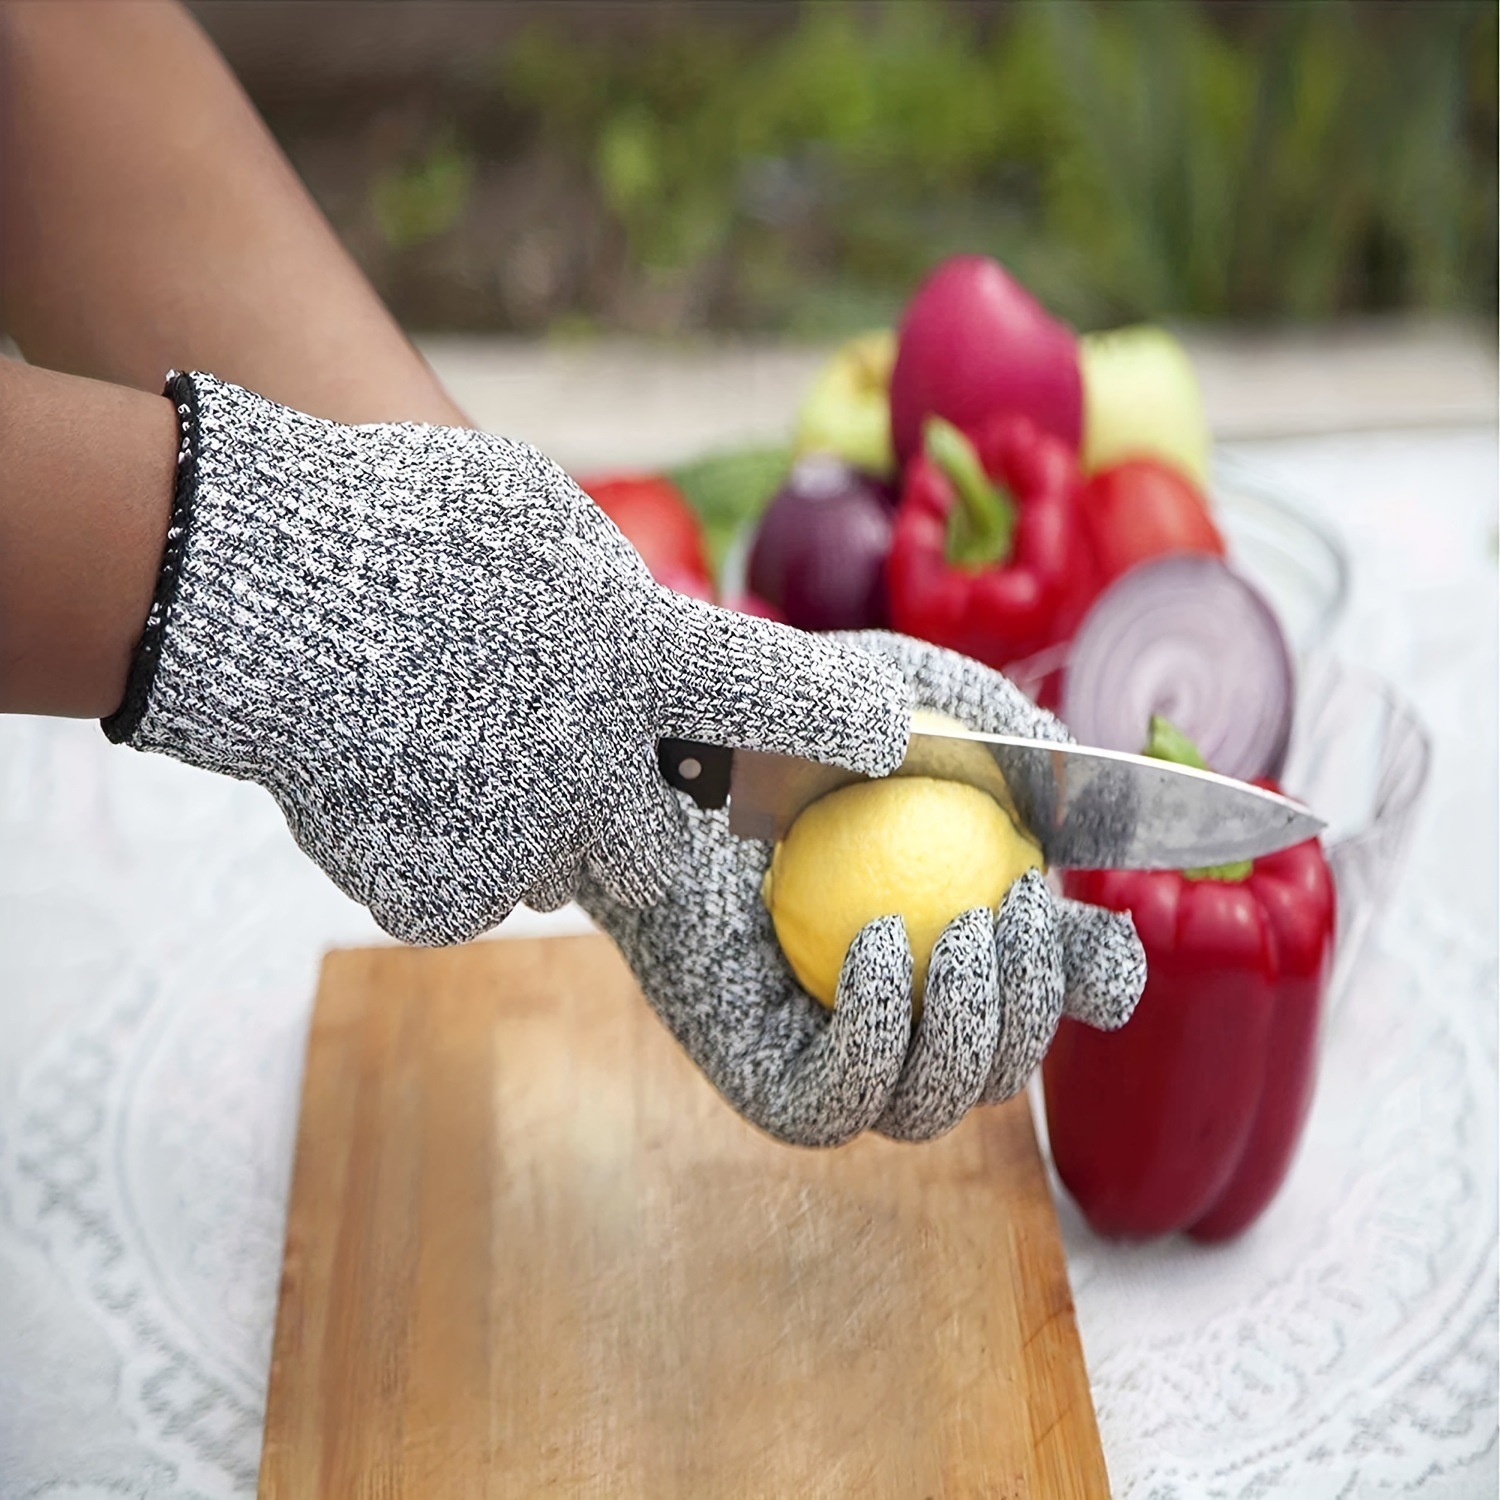 Cut Resistant Gloves Food Grade Level 5 Protection Safety Kitchen Cuts  Gloves